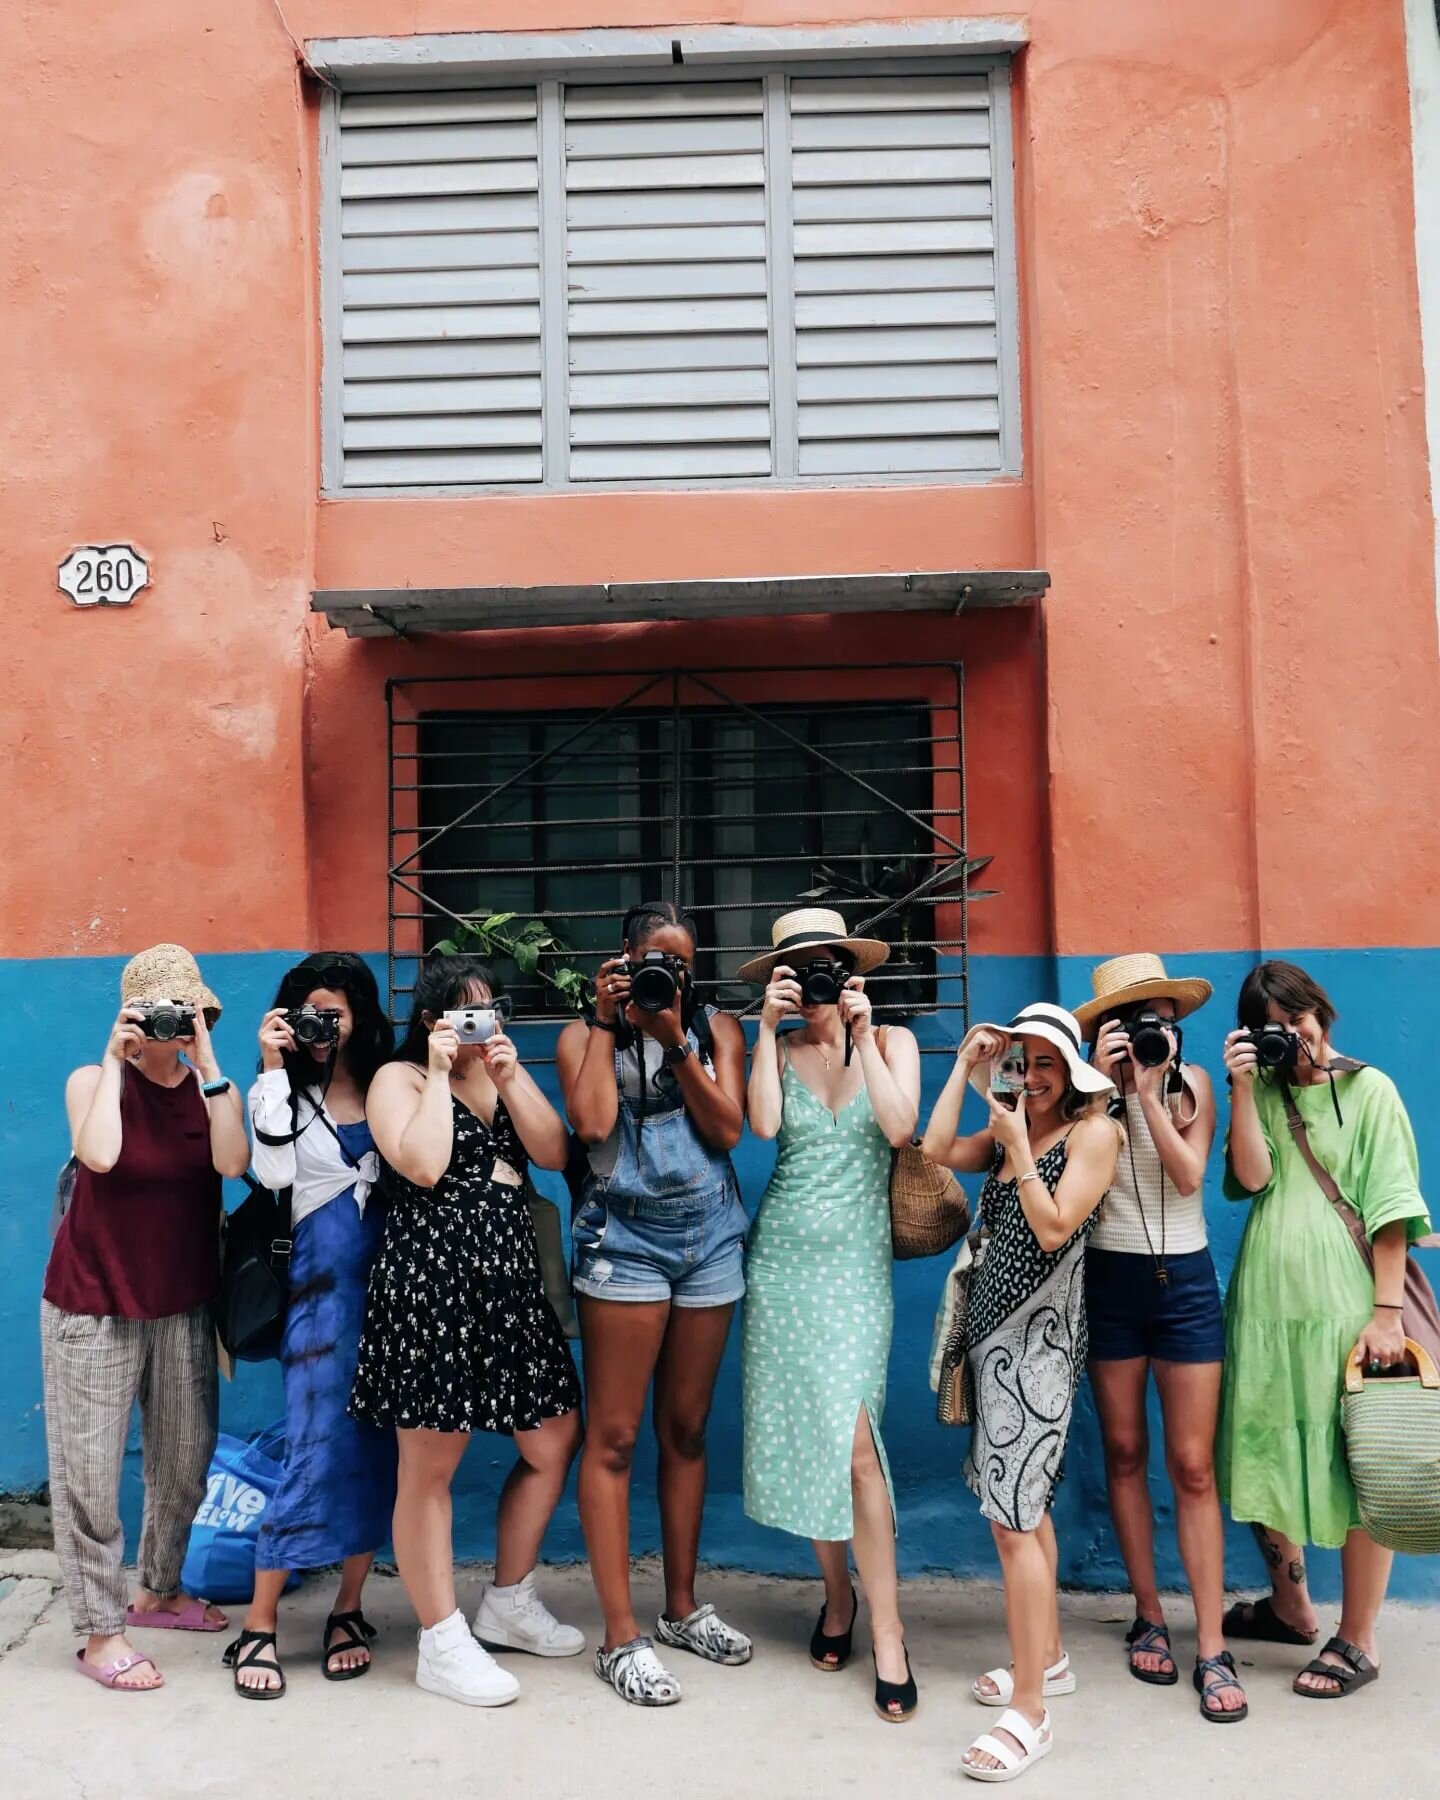 still processing after a beautiful week in cuba getting to meet so many inspiring ladies. excited to share more and thankful for @womenphototours for sharing so much with us and giving such a colorful, generous experience.

photo by @amandabjorn